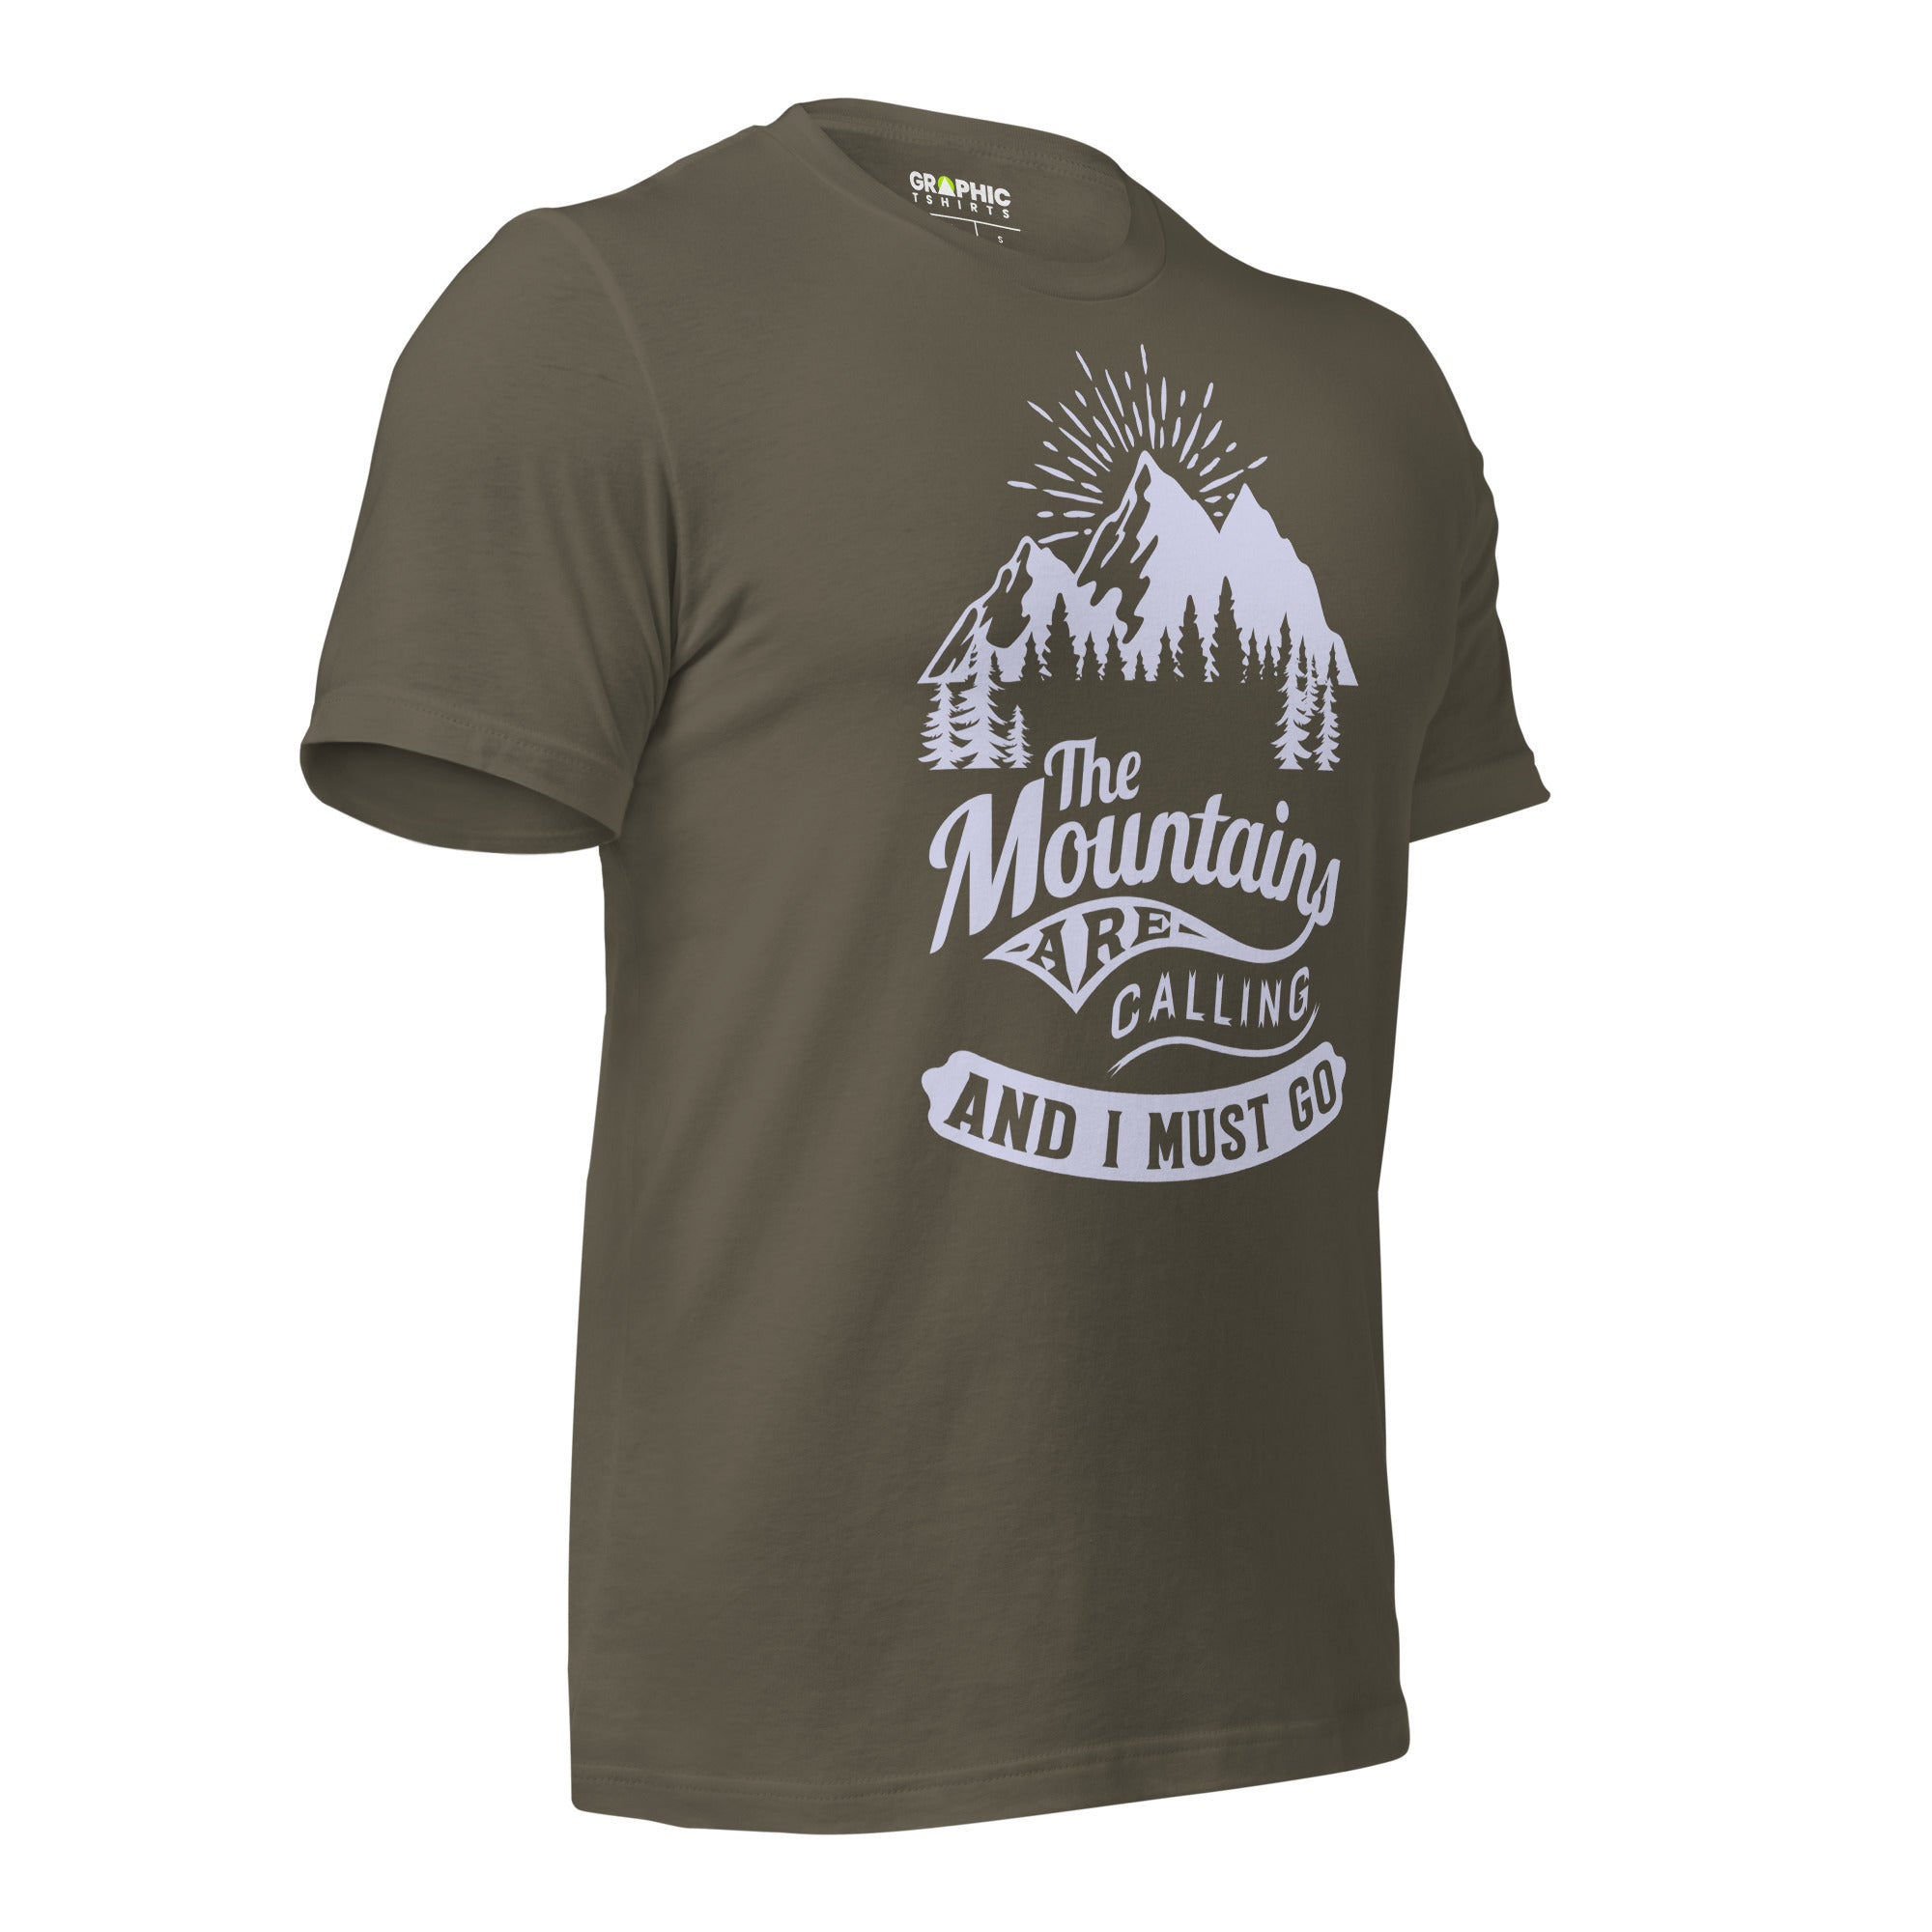 Unisex Staple T-Shirt - The Mountains Are Calling And I Must Go - GRAPHIC T-SHIRTS